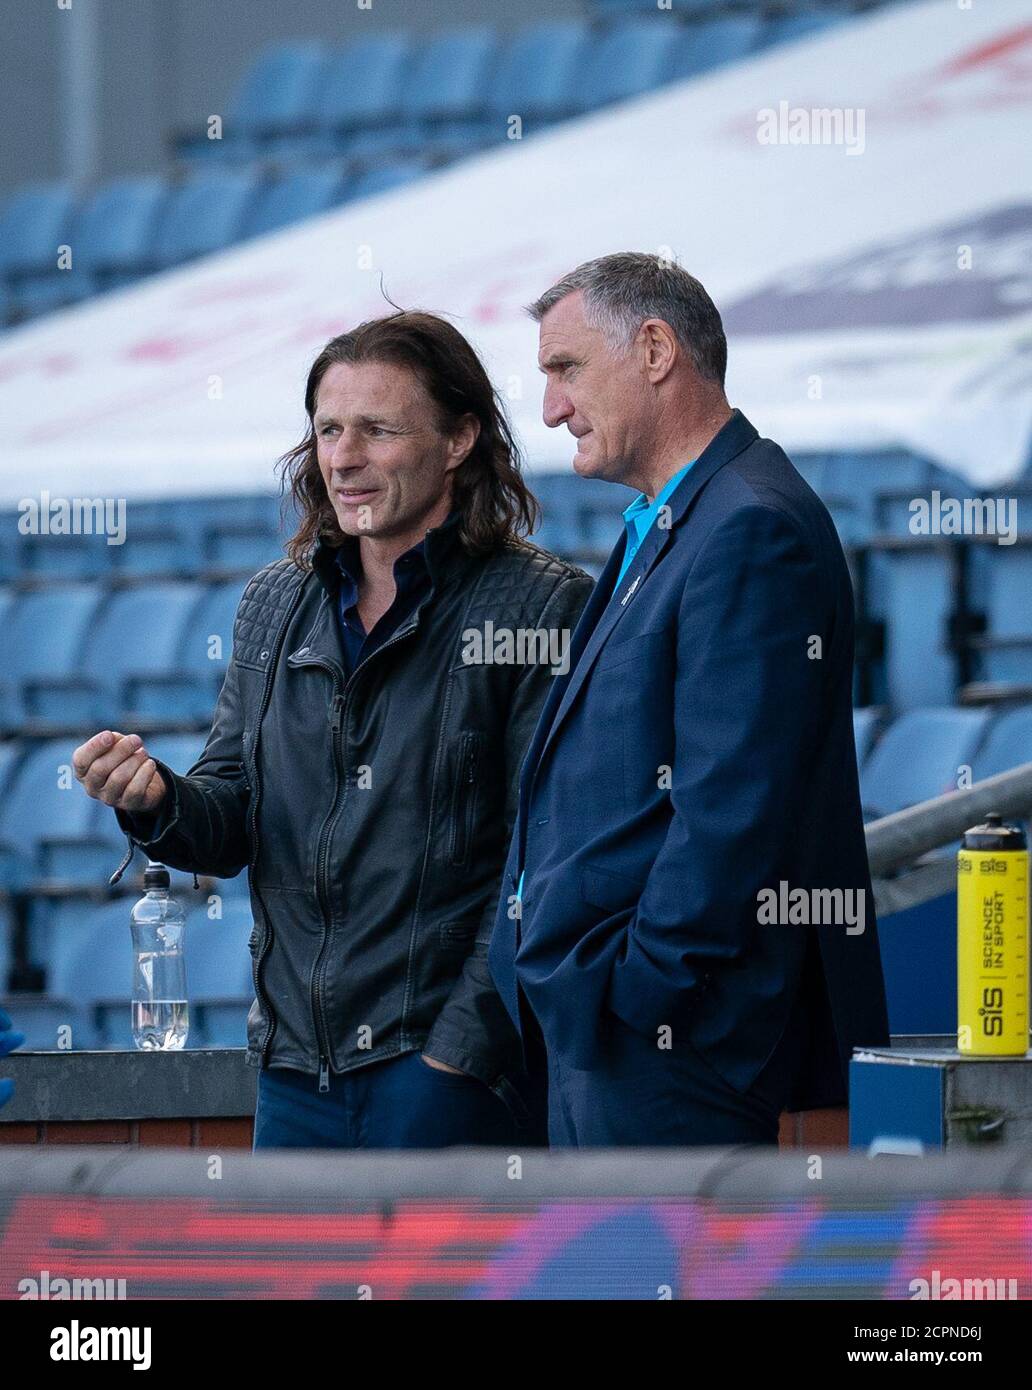 Blackburn, UK. 19th Sep, 2020. Wycombe Wanderers manager Gareth Ainsworth & Manager Tony Mowbray during the Sky Bet Championship behind closed doors match between Blackburn Rovers and Wycombe Wanderers at Ewood Park, Blackburn, England on 19 September 2020. Photo by Andy Rowland. Credit: PRiME Media Images/Alamy Live News Stock Photo